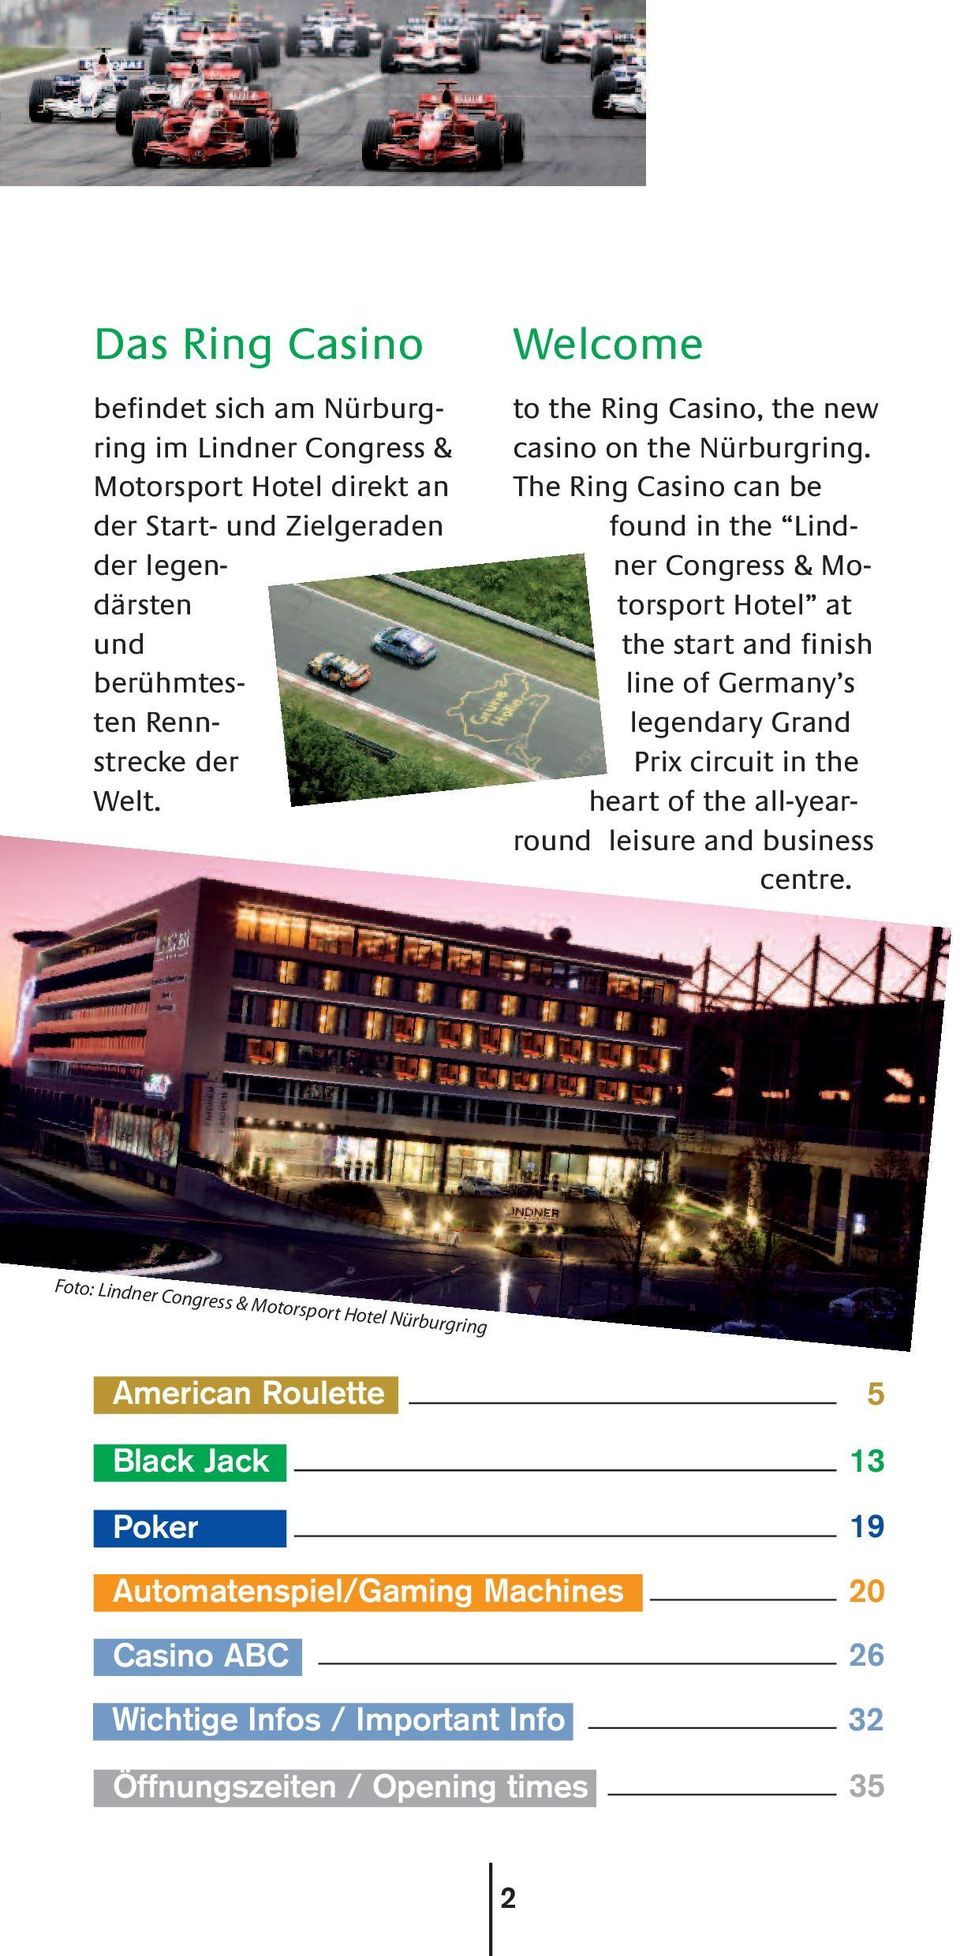 The Ring Casino can be found in the Lindner Congress & Motorsport Hotel at the start and finish line of Germany s legendary Grand Prix circuit in the heart of the